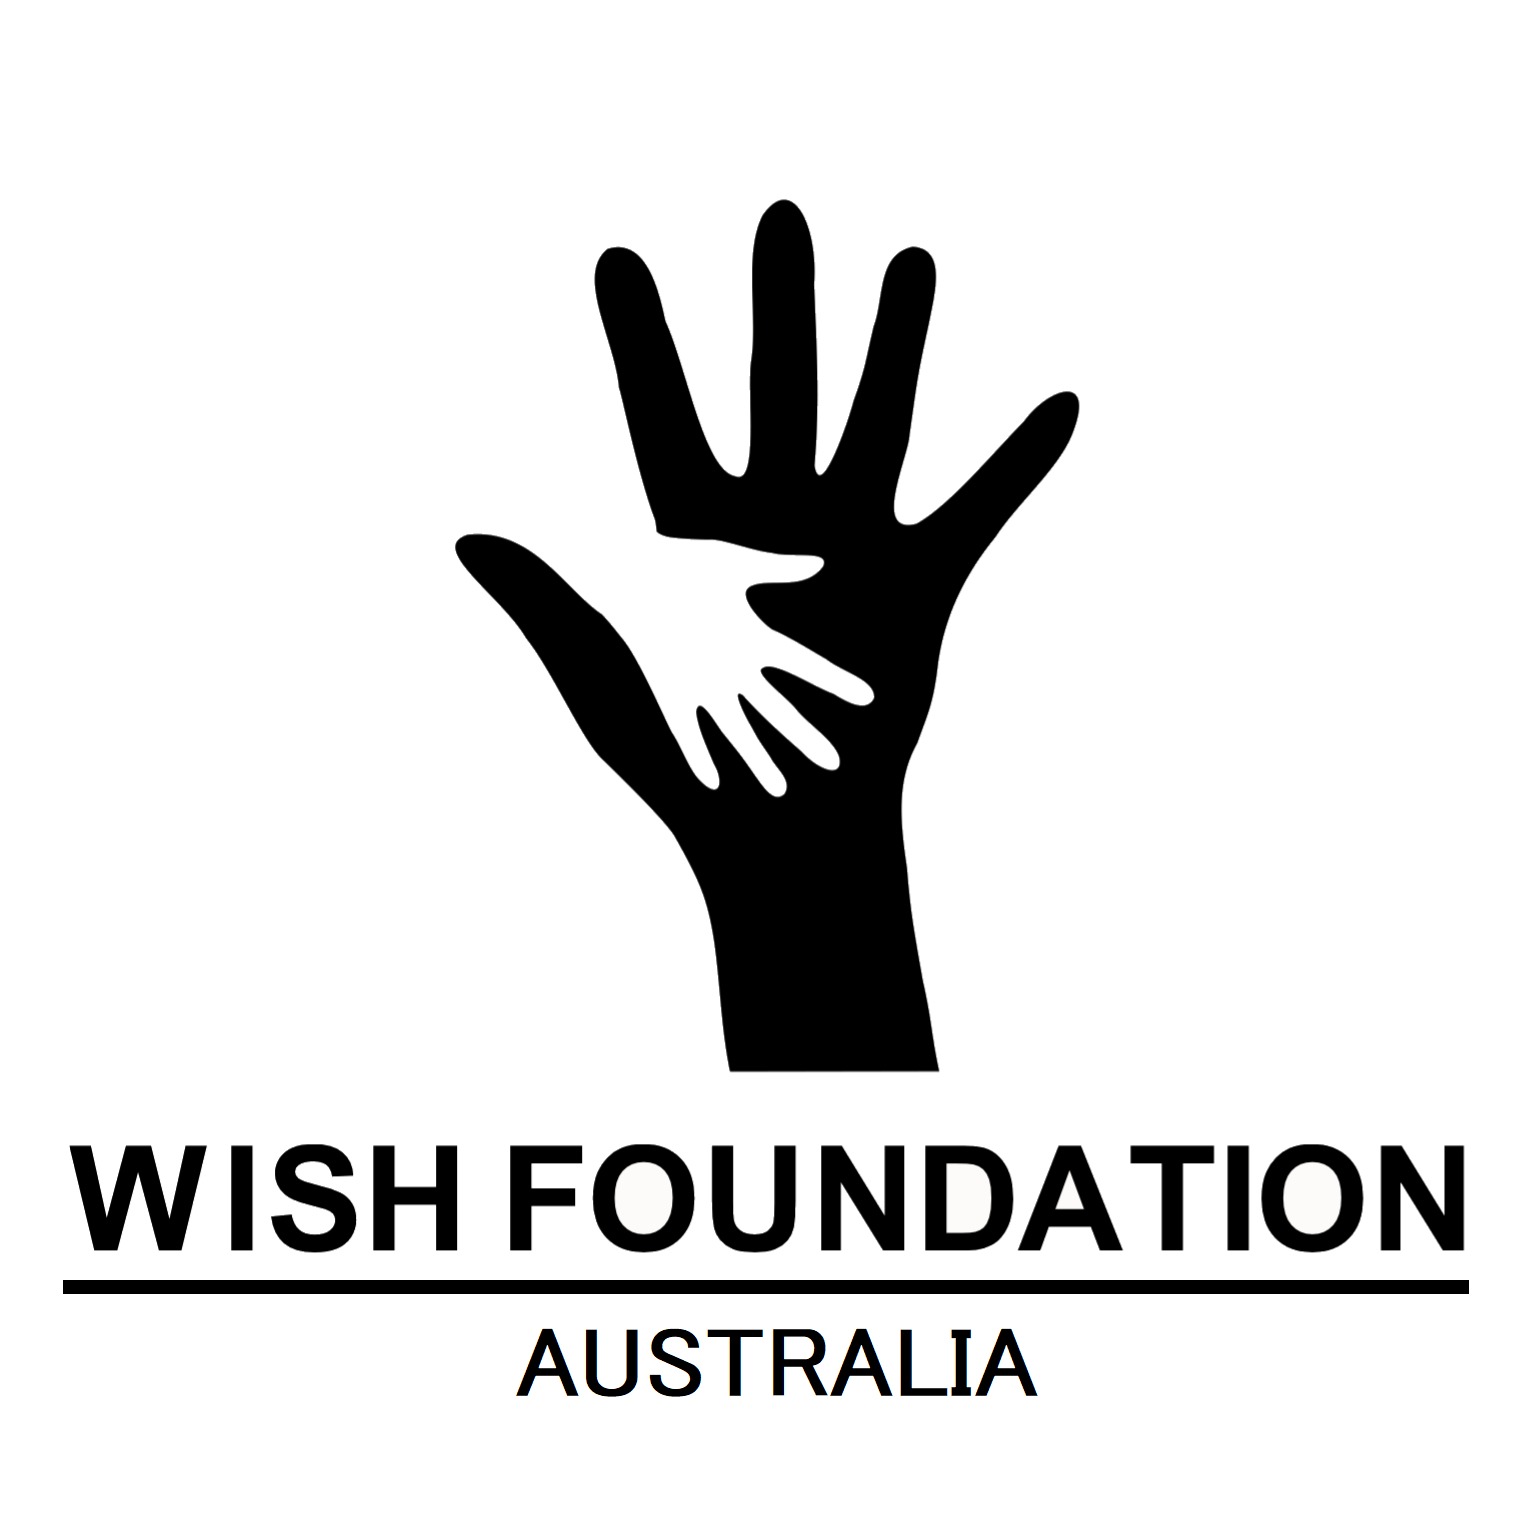  Wish Foundation Australia donated 90000$ to Banin Charity to be distributed as a support for families affected in Beirut Port Blast